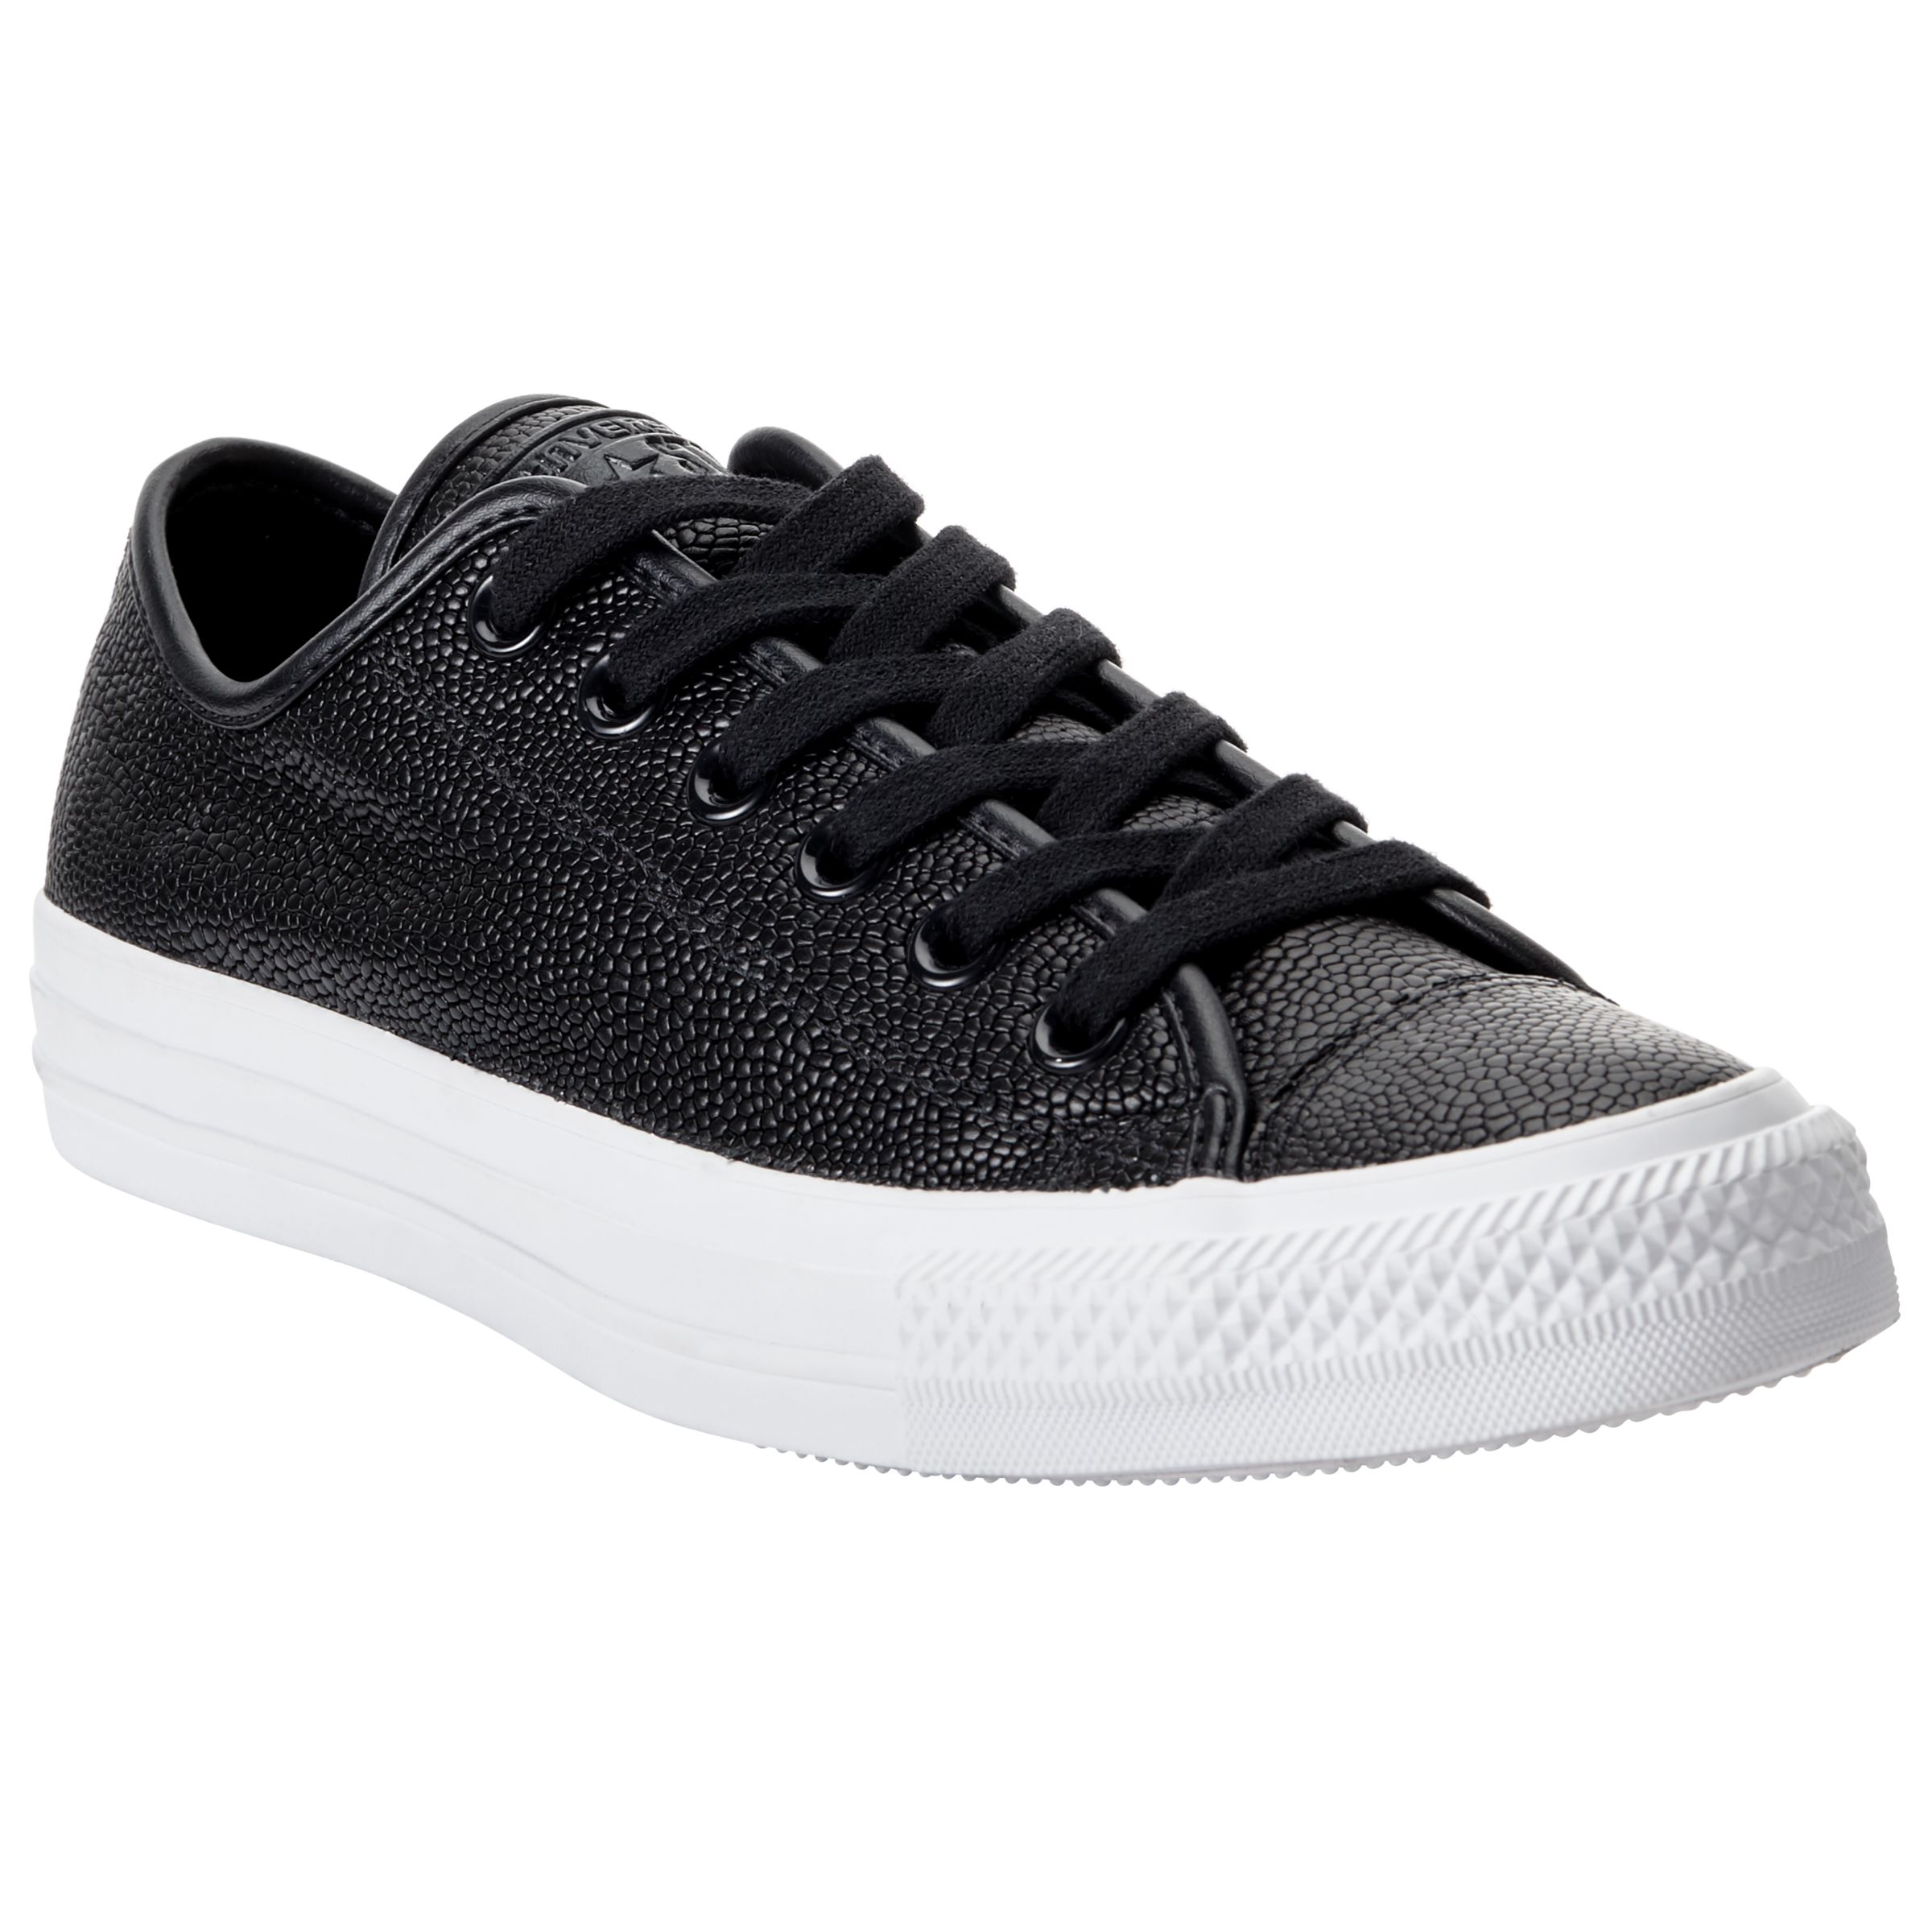 converse all star ox black leather trainers